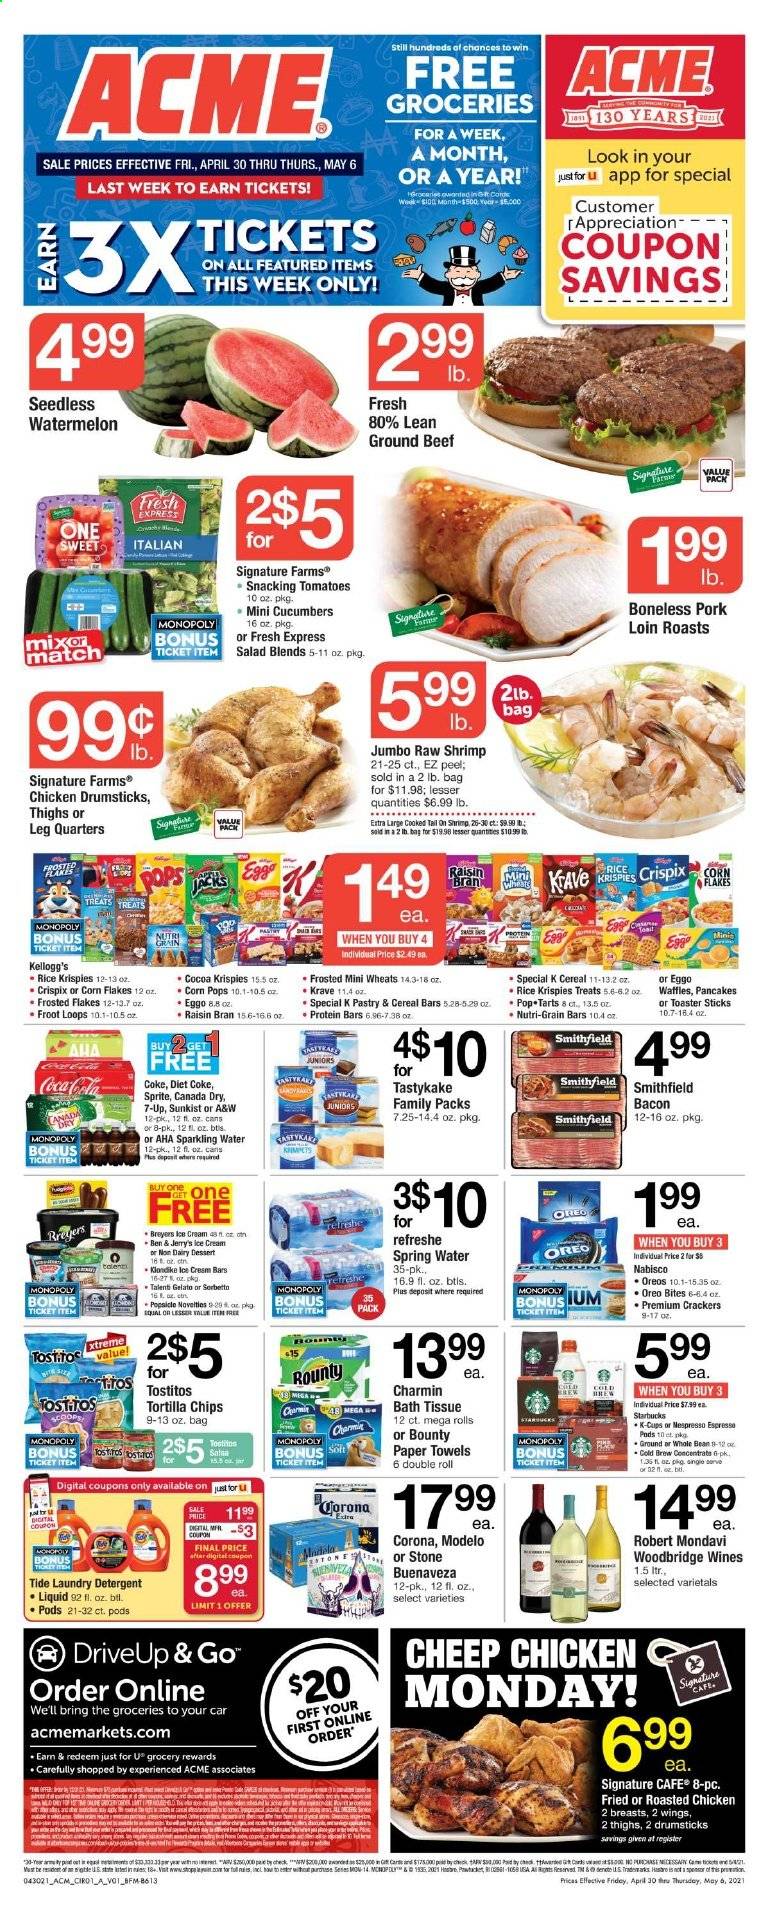 thumbnail - ACME Flyer - 04/30/2021 - 05/06/2021 - Sales products - cucumber, tomatoes, salad, watermelon, shrimps, chicken roast, bacon, Oreo, eggs, ice cream, Ben & Jerry's, Talenti Gelato, gelato, Bounty, cereal bar, crackers, Kellogg's, Pop-Tarts, Nutri-Grain bars, tortilla chips, chips, Tostitos, cocoa, cereals, corn flakes, protein bar, Rice Krispies, Frosted Flakes, Corn Pops, Raisin Bran, Nutri-Grain, Canada Dry, Coca-Cola, Sprite, Diet Coke, 7UP, A&W, spring water, sparkling water, Starbucks, coffee capsules, K-Cups, Woodbridge, beer, Corona Extra, Modelo, chicken drumsticks, beef meat, ground beef, pork loin, pork meat, bath tissue, kitchen towels, paper towels, Charmin, detergent, Tide, laundry detergent, toaster. Page 1.